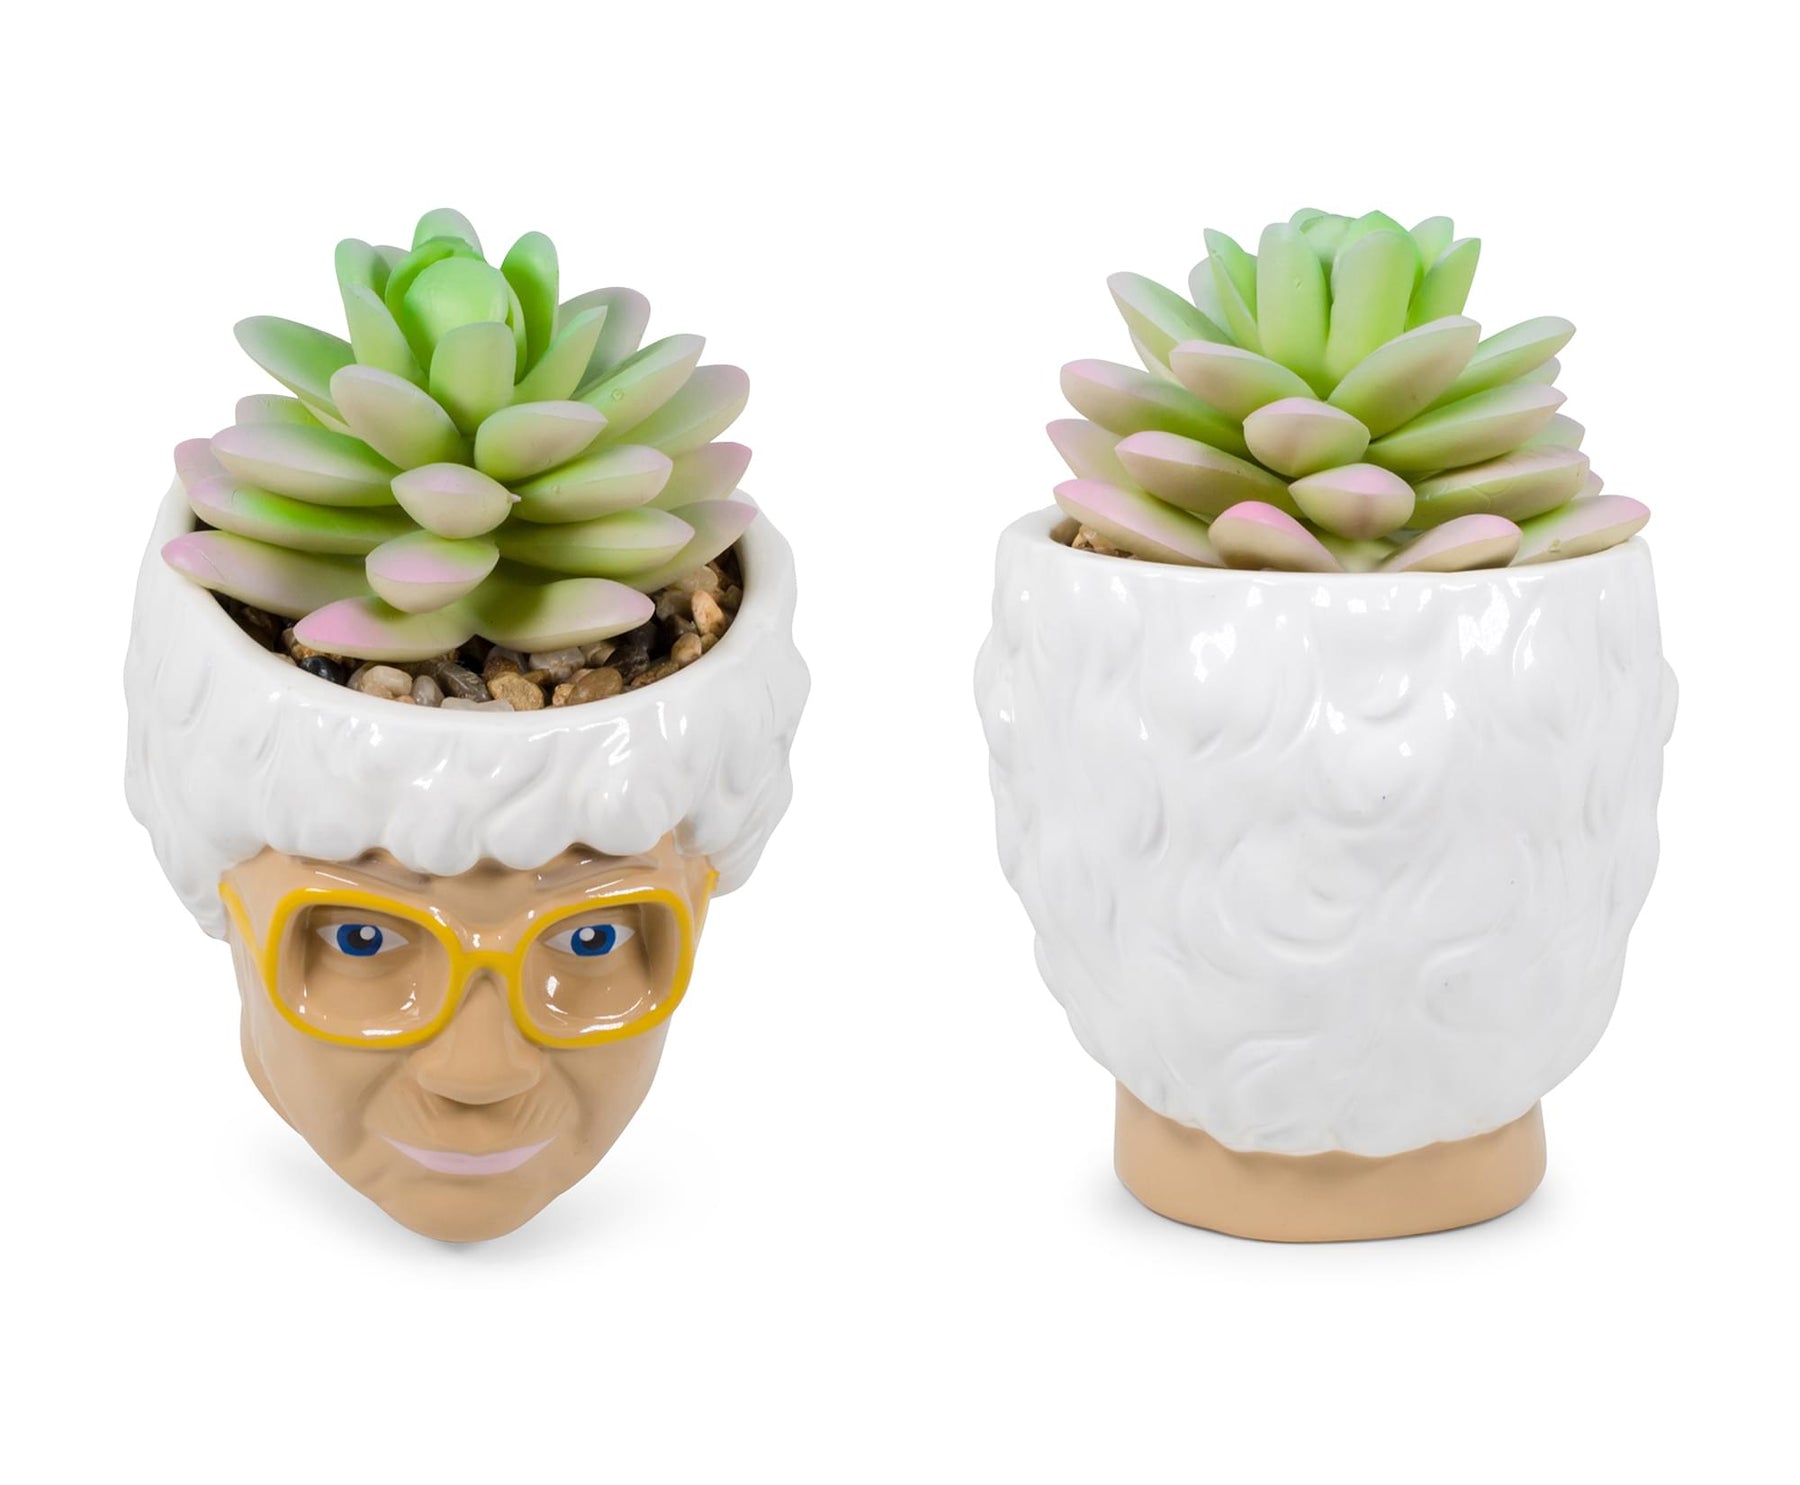 The Golden Girls Sophia Face Mini Ceramic Planter With Faux Succulent | 3 Inches